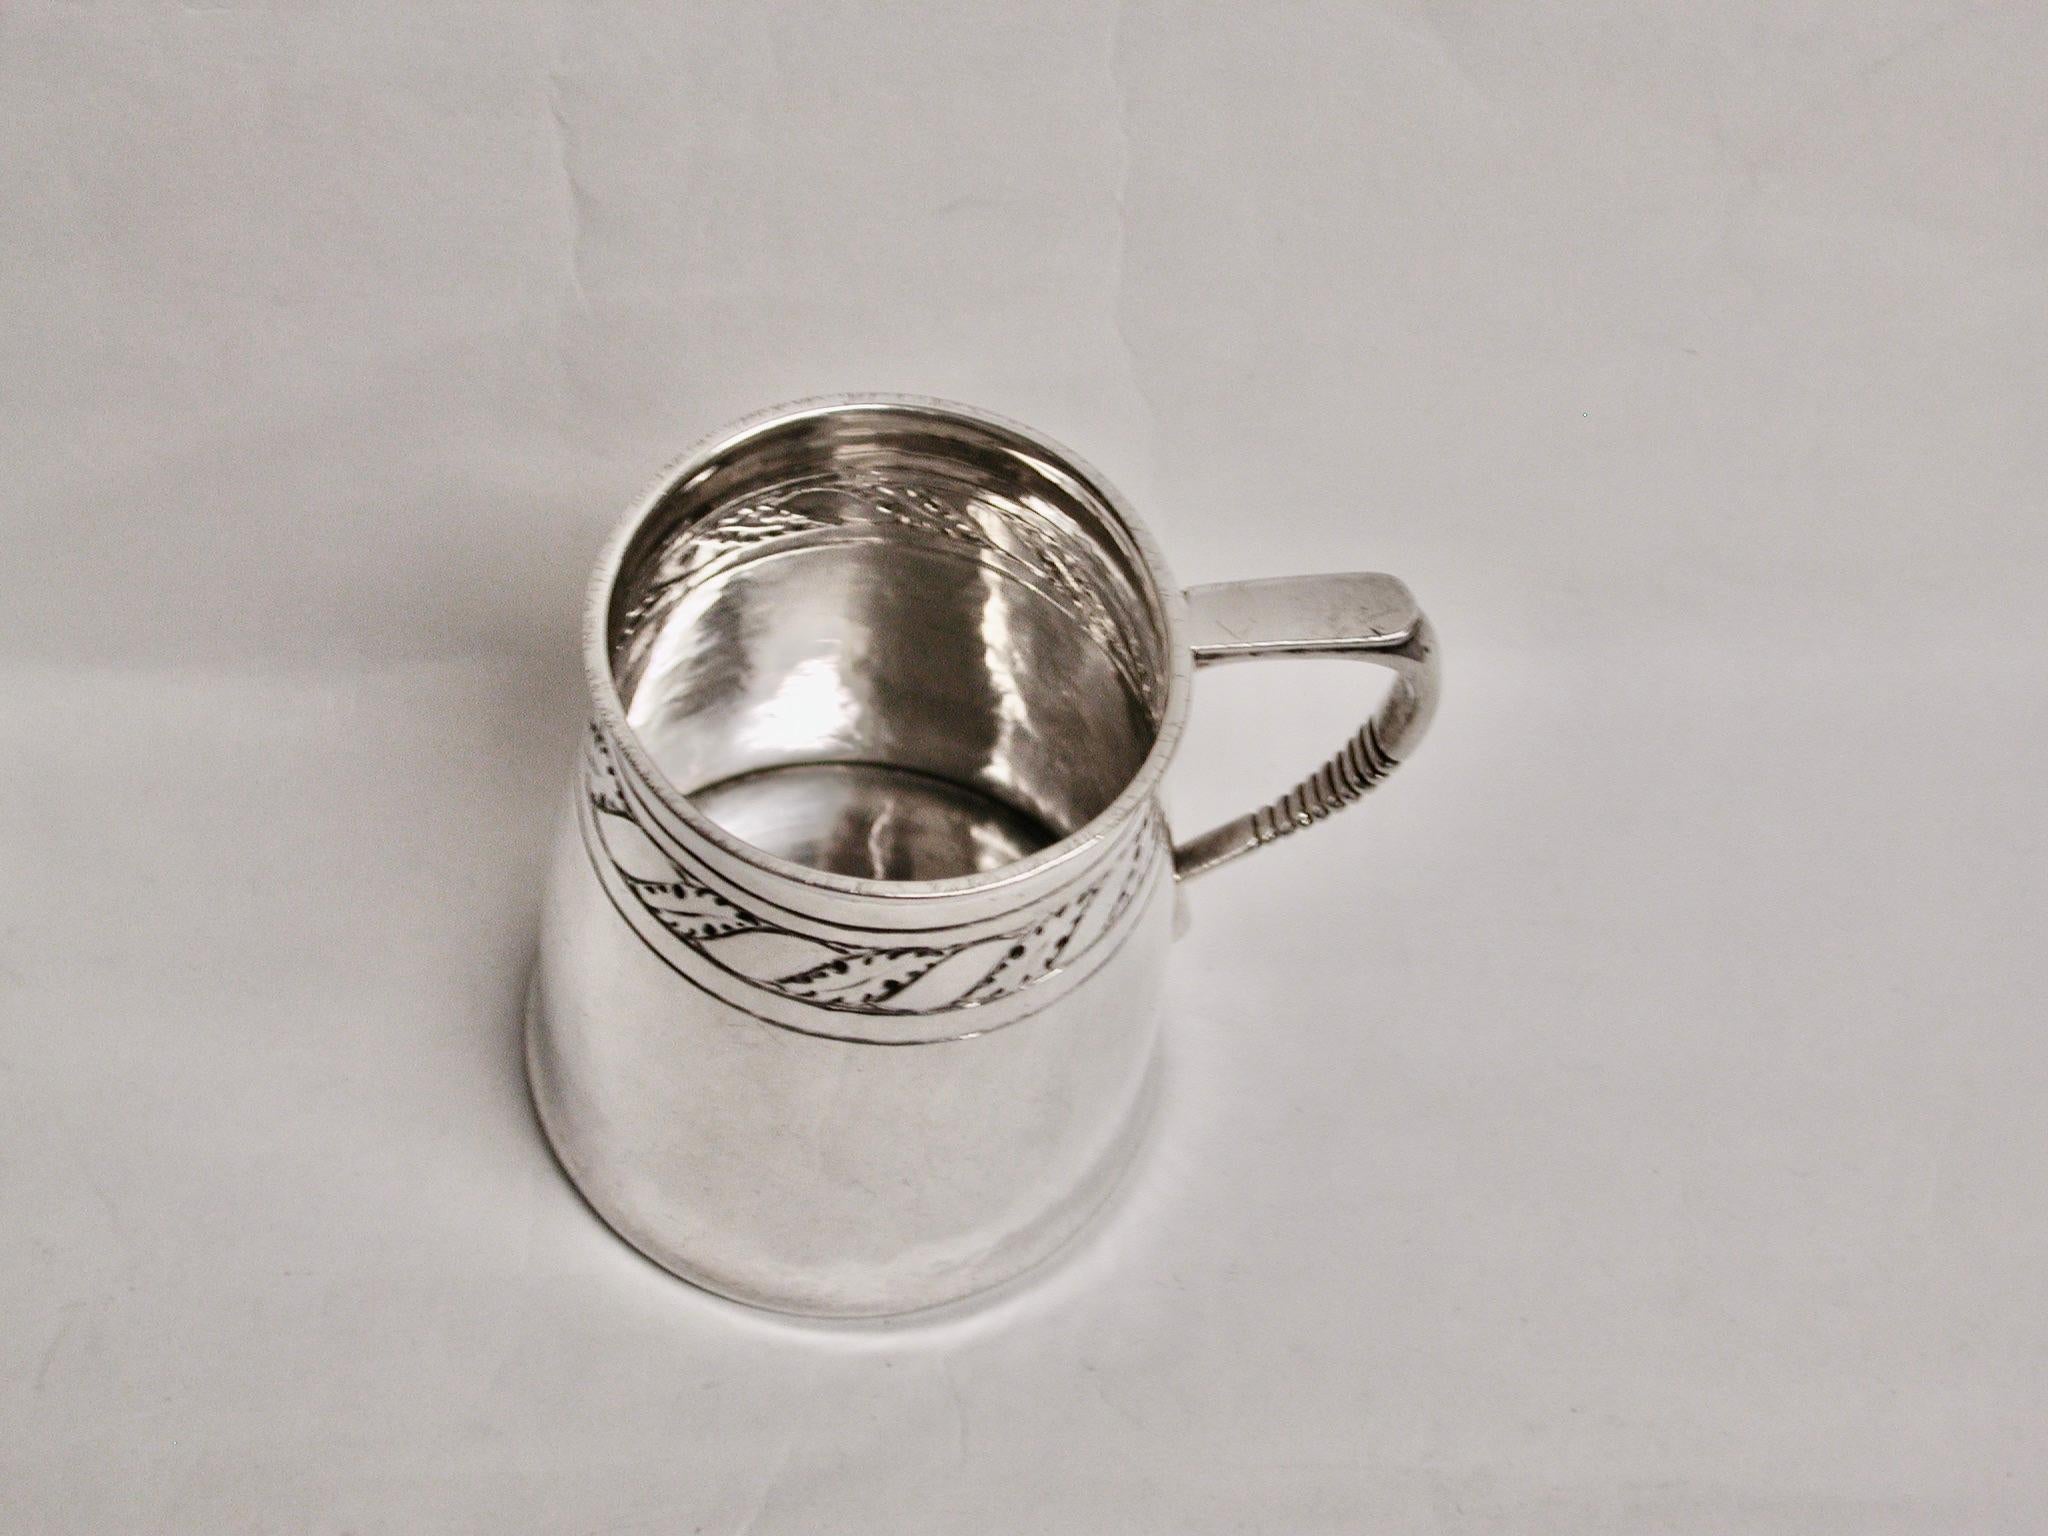 Antique Arts & Crafts Liberty & Co Silver Child's Tankard Dated 1923 Birmingham
Beautifully crafted with hand hammering with a leaf type garland around the top
 of the tankard.